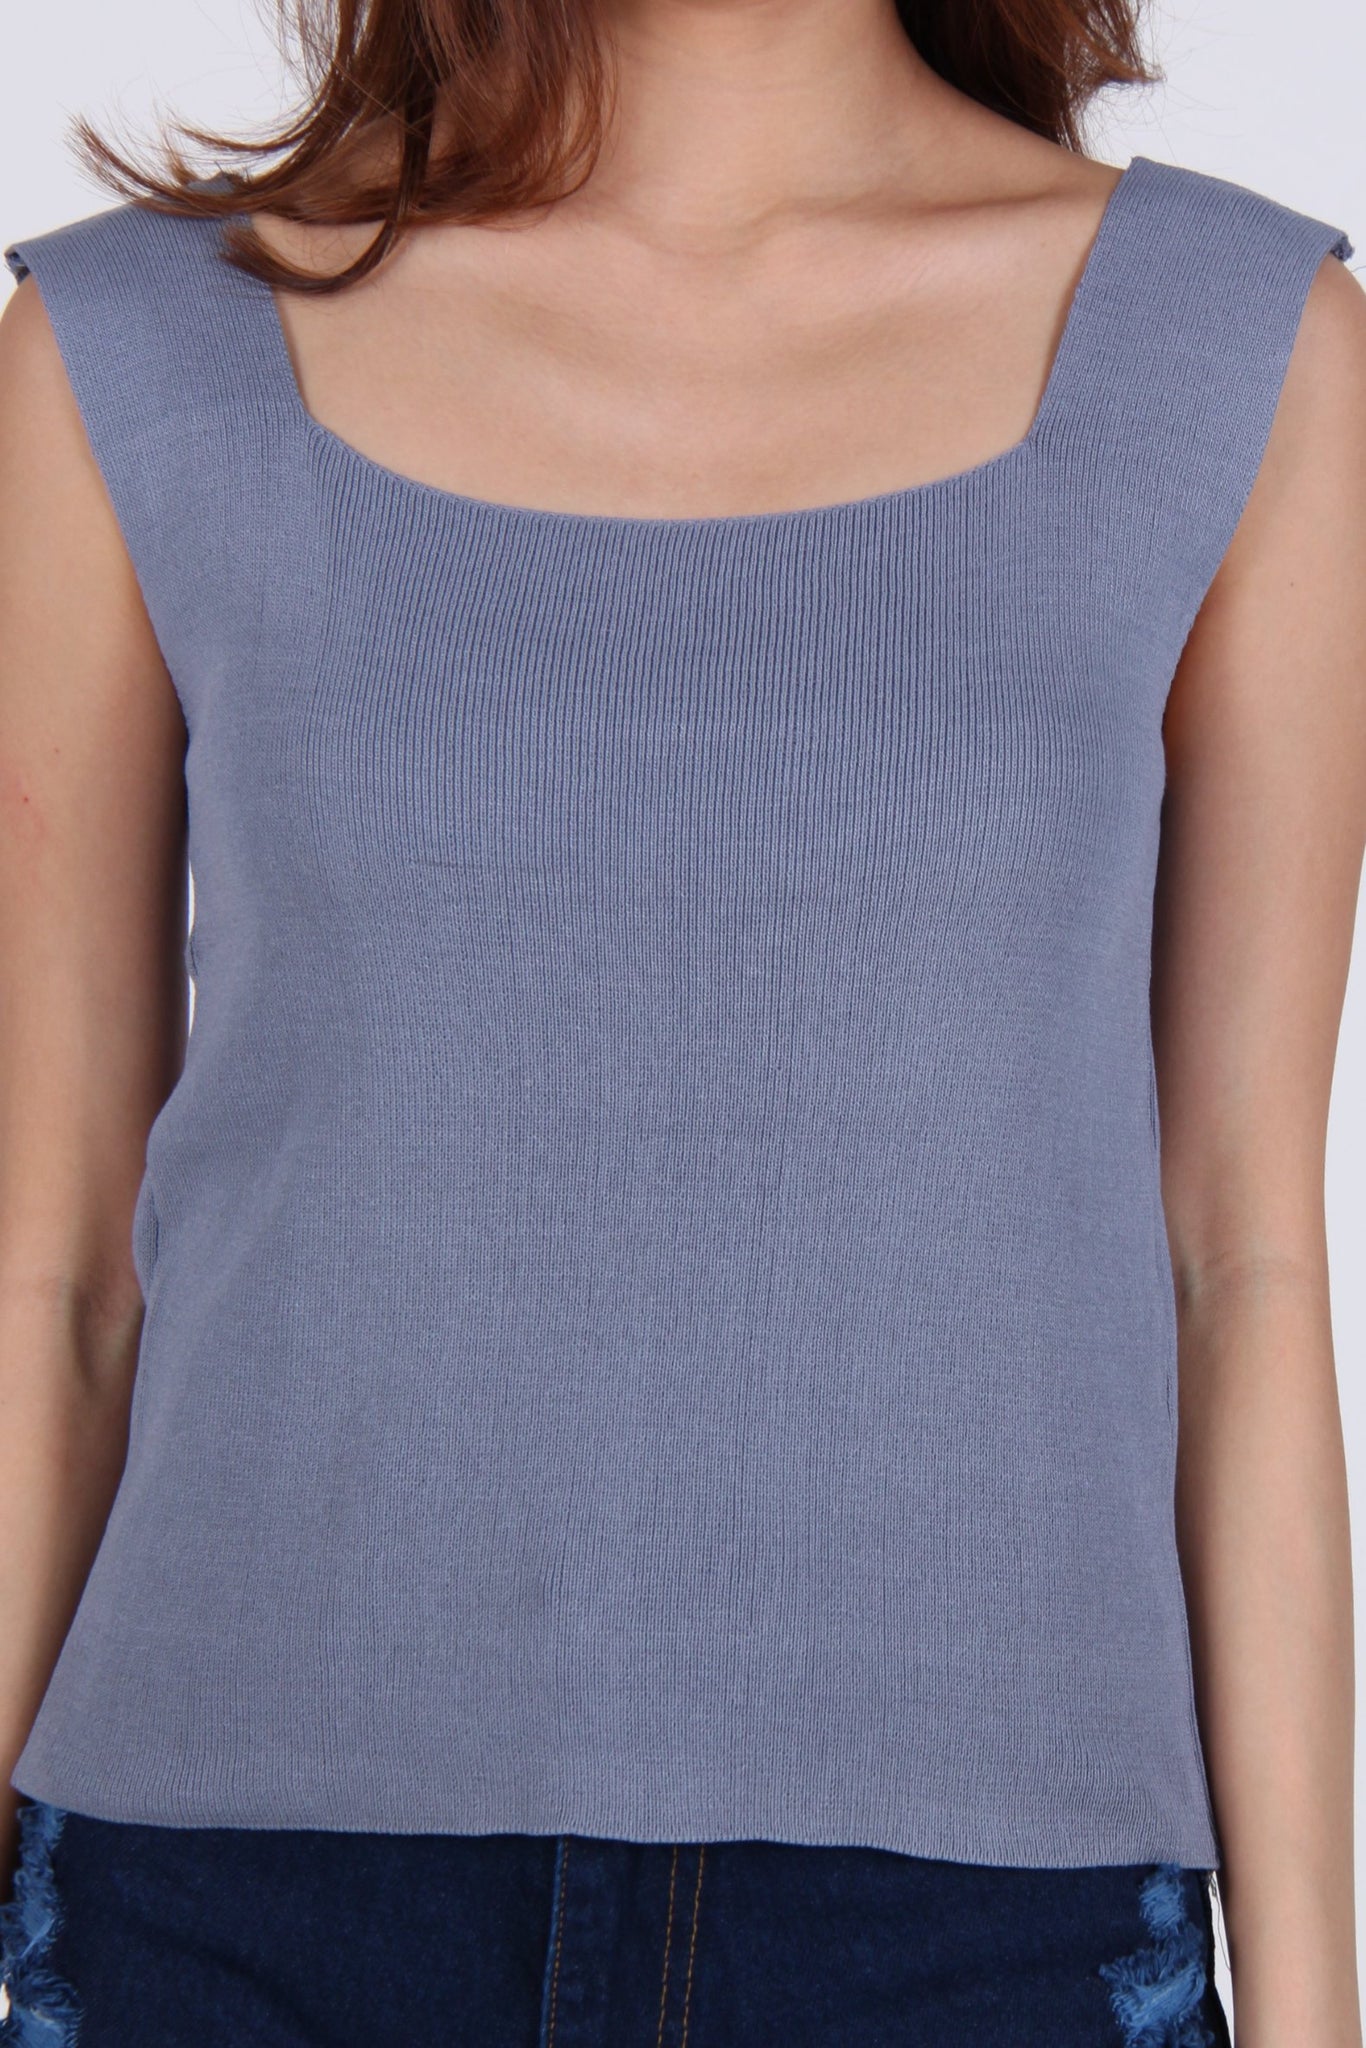 Knit Square Neck Sleeveless Top in Blue-Grey